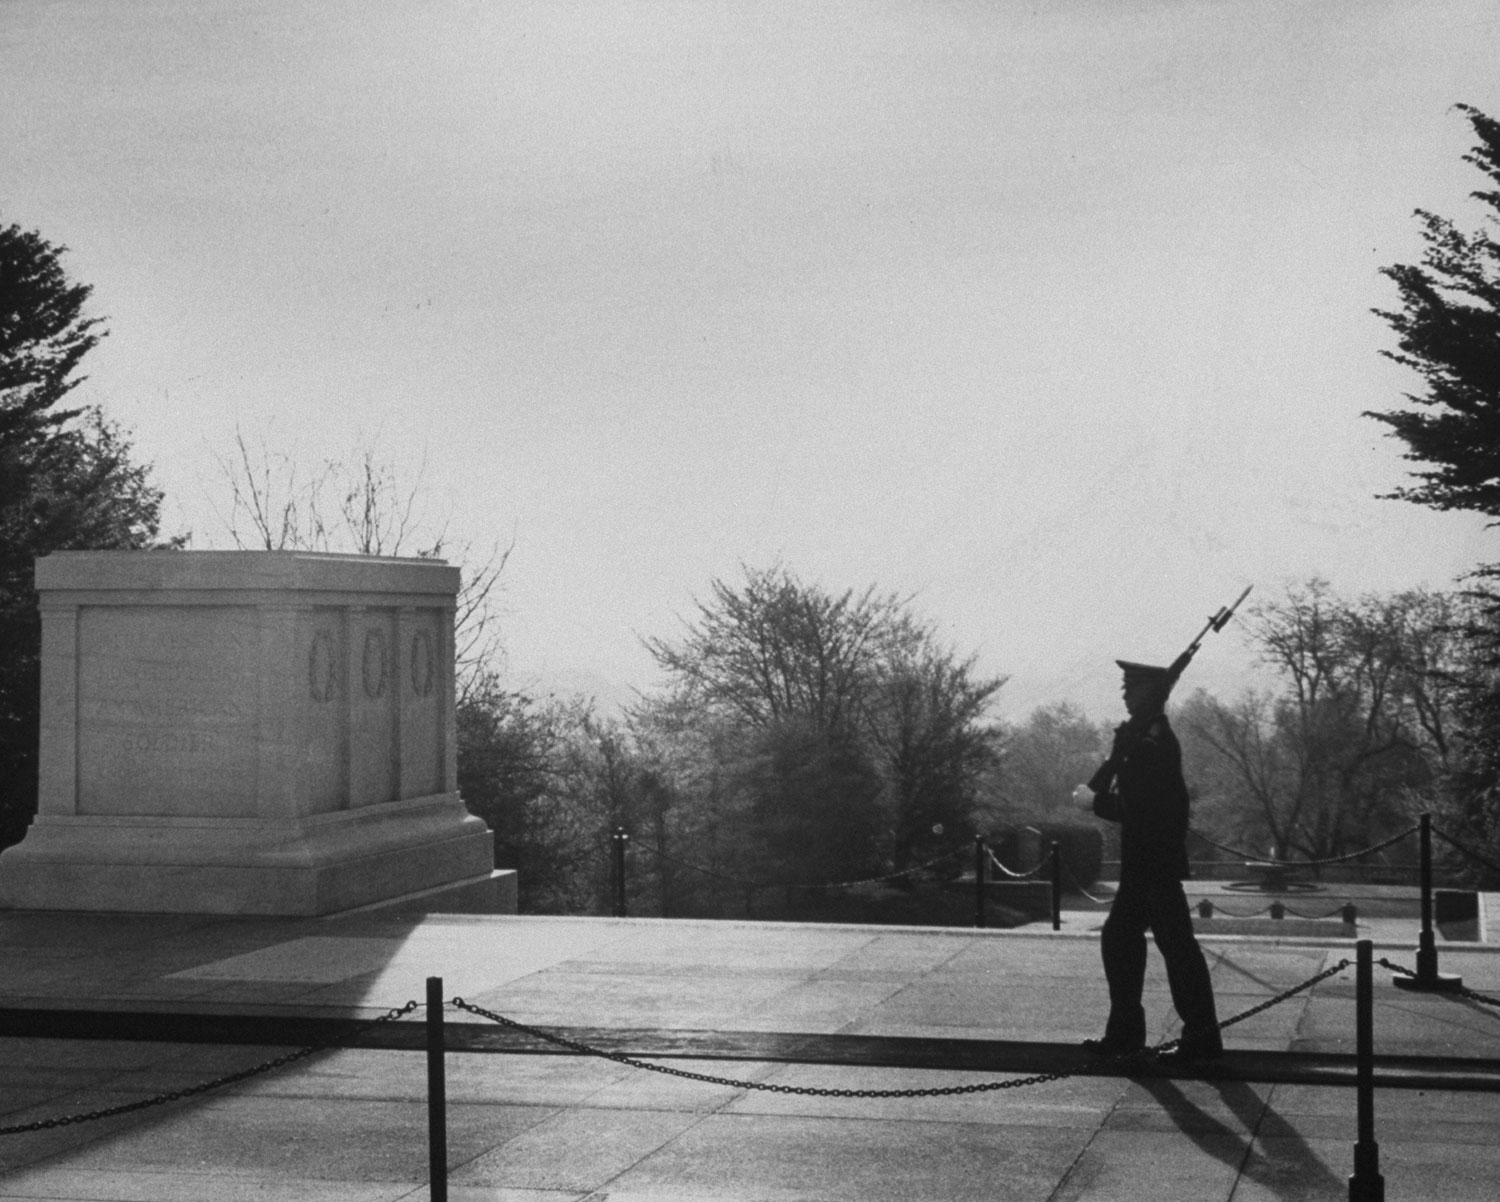 Tomb of the Unknown Soldier, Arlington National Cemetery, 1965.